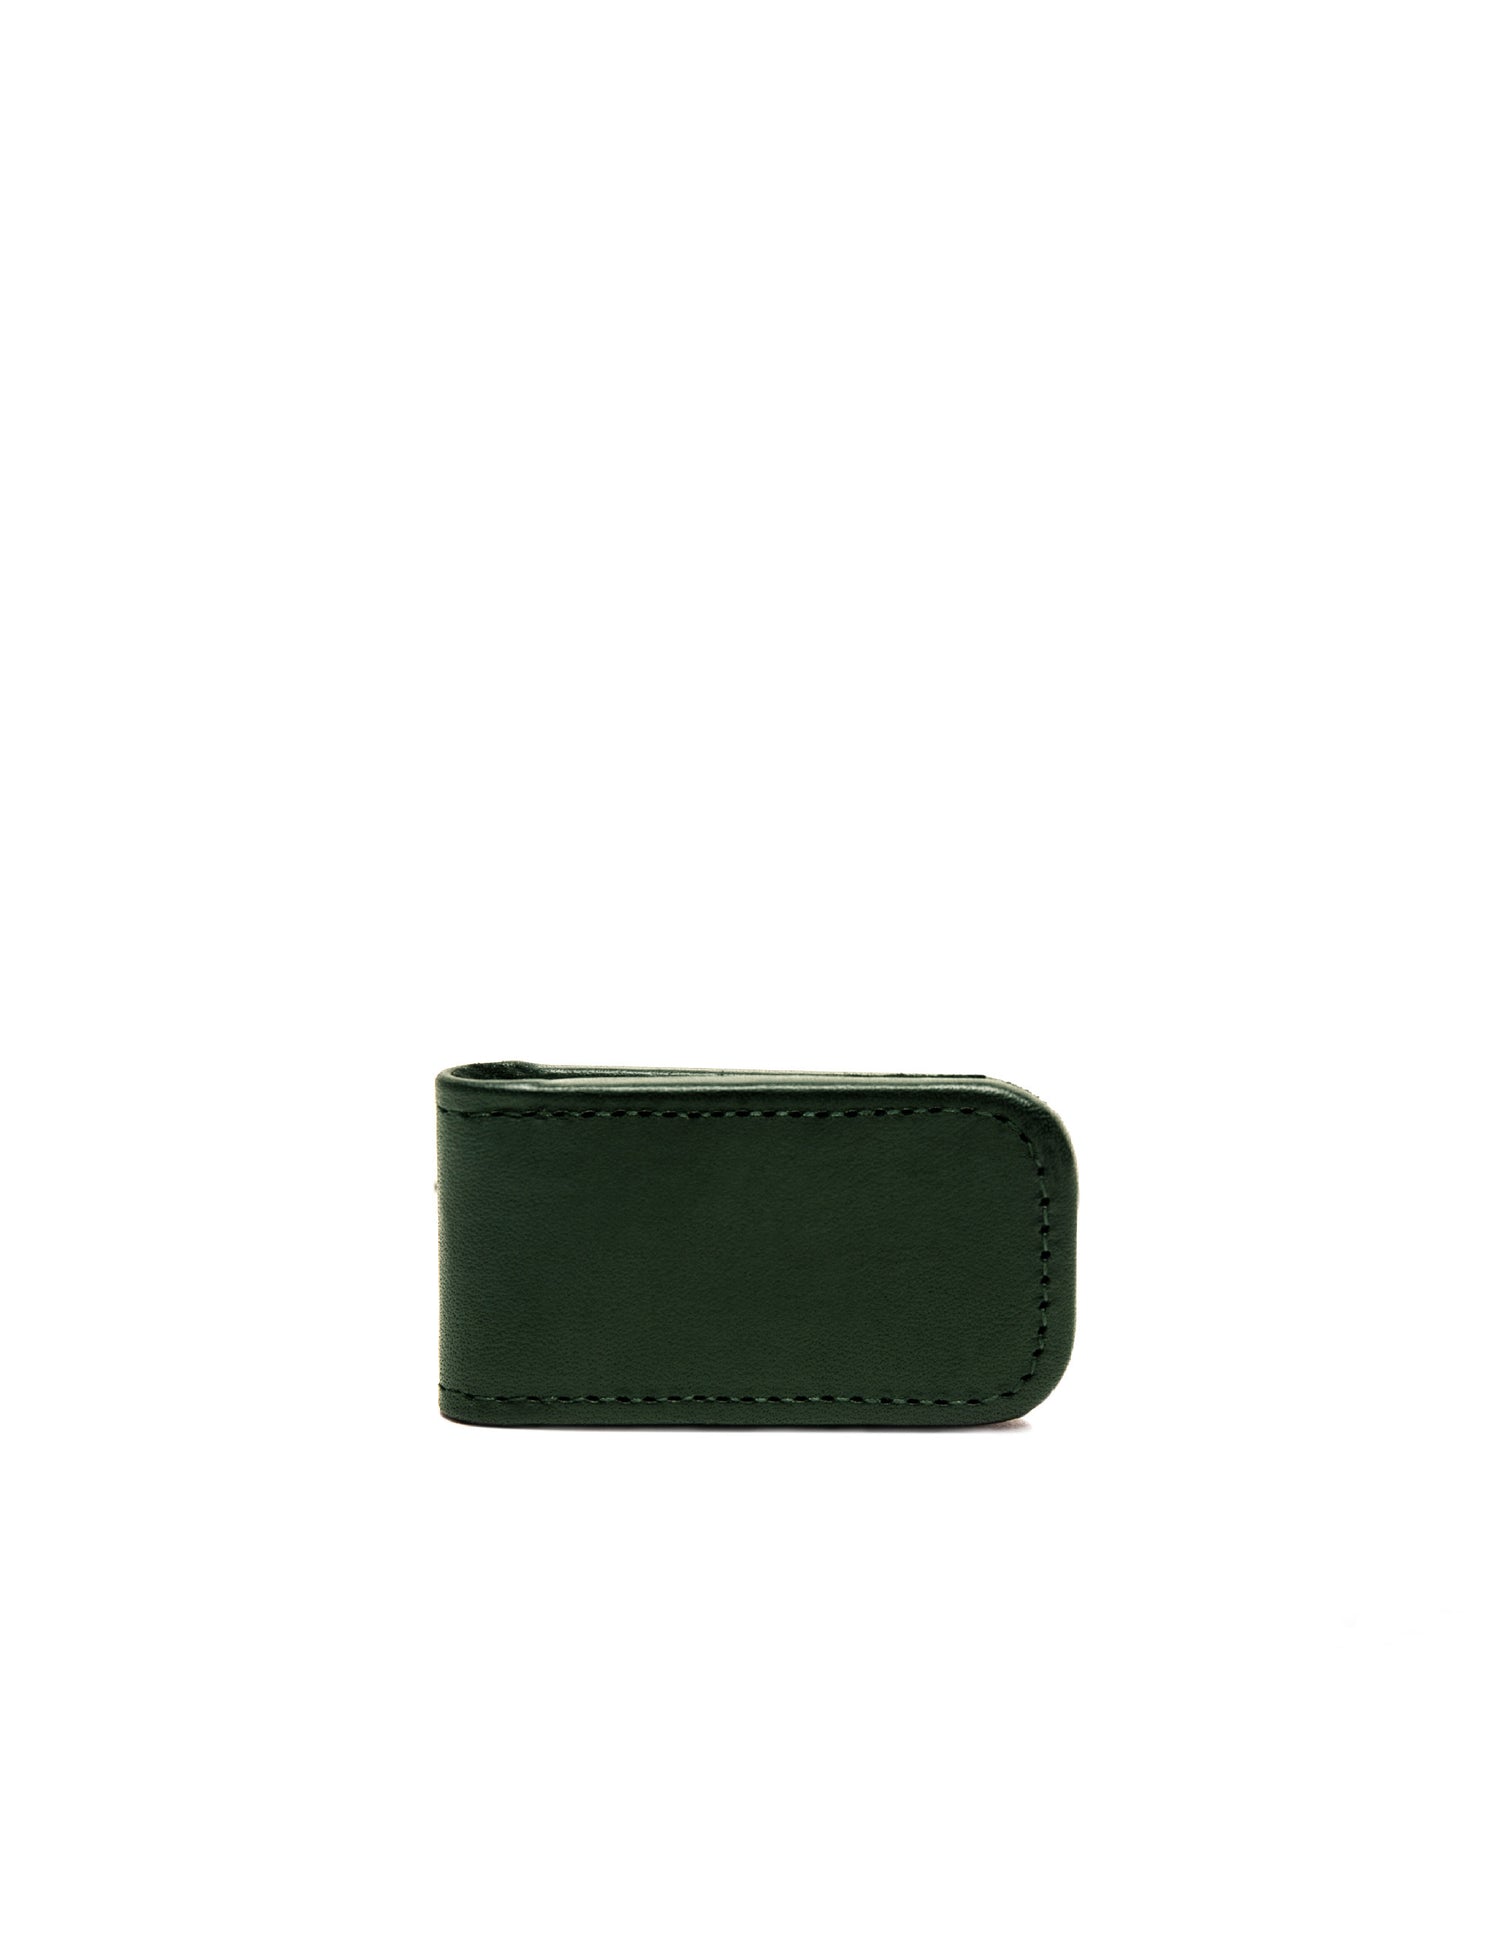 Ettinger Magnetic Cash Clip in Green on its side